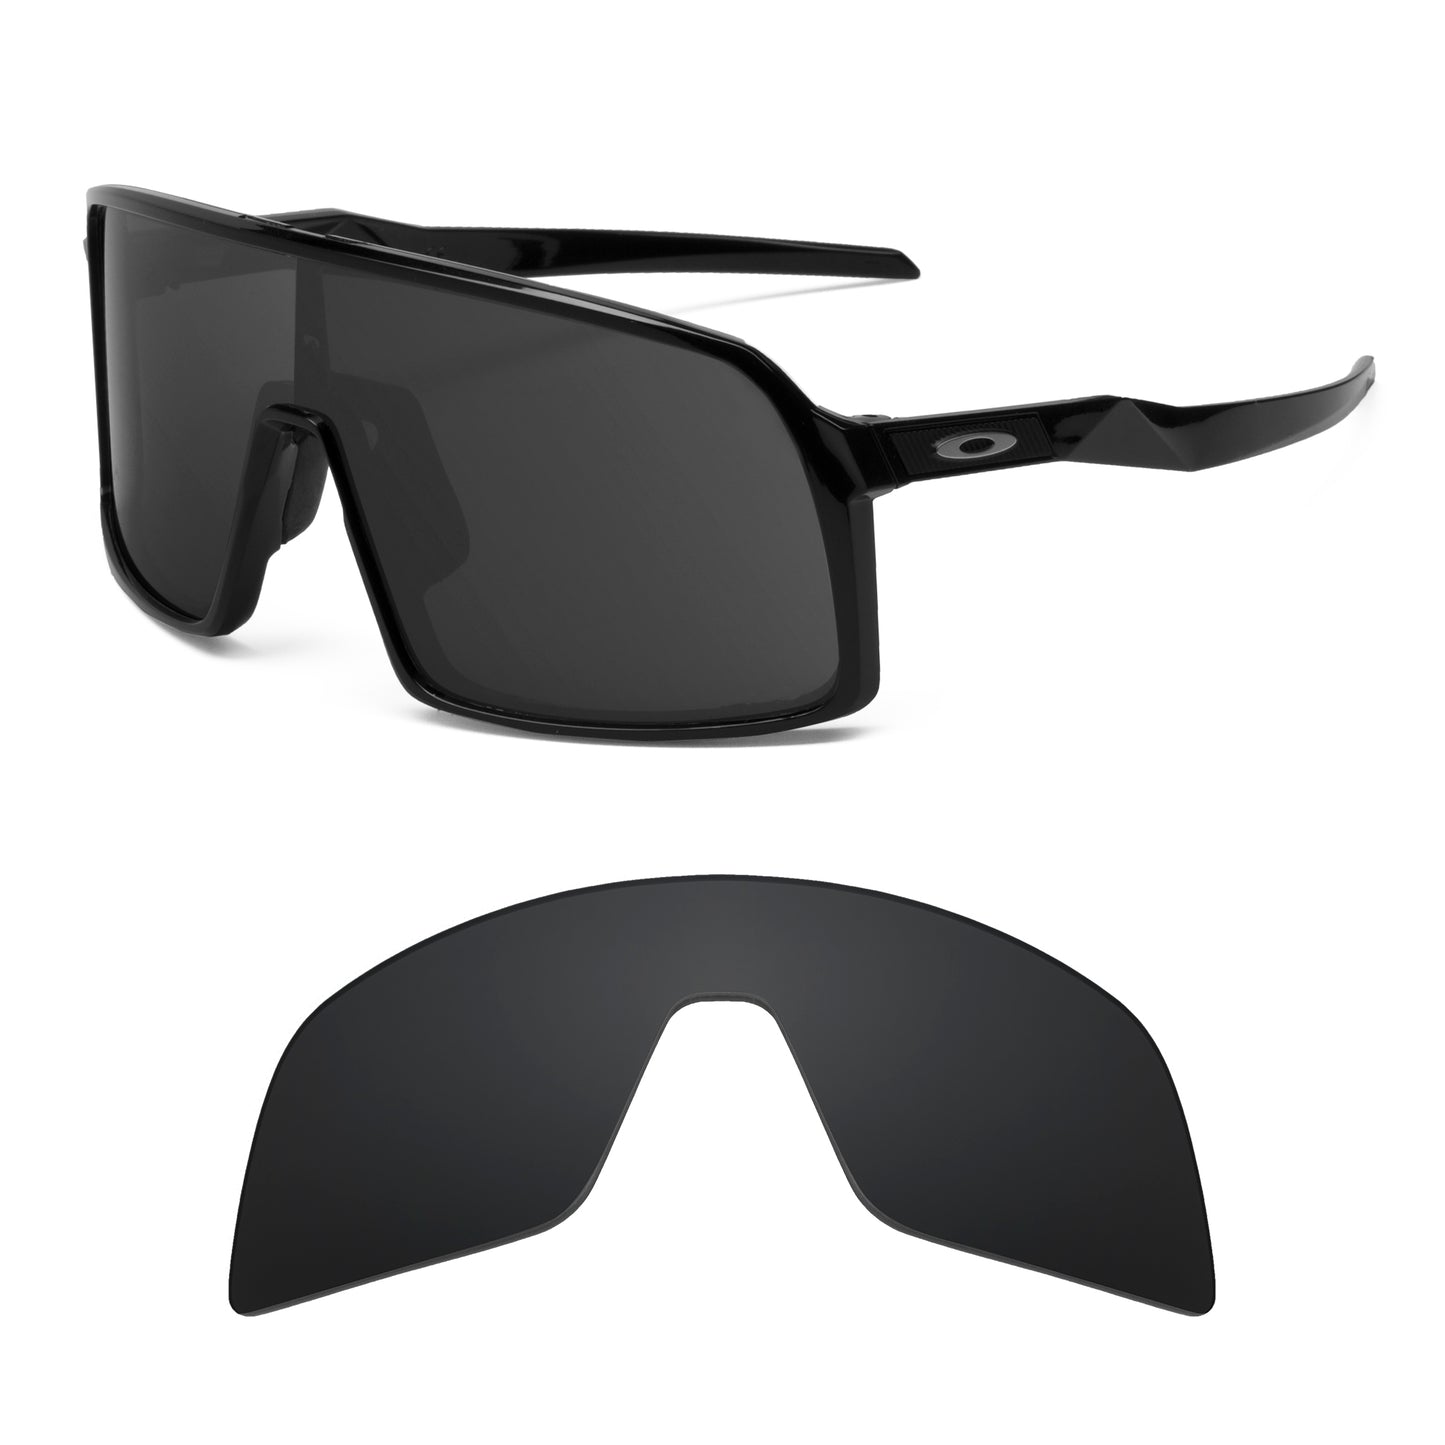 Oakley Sutro sunglasses with replacement lenses